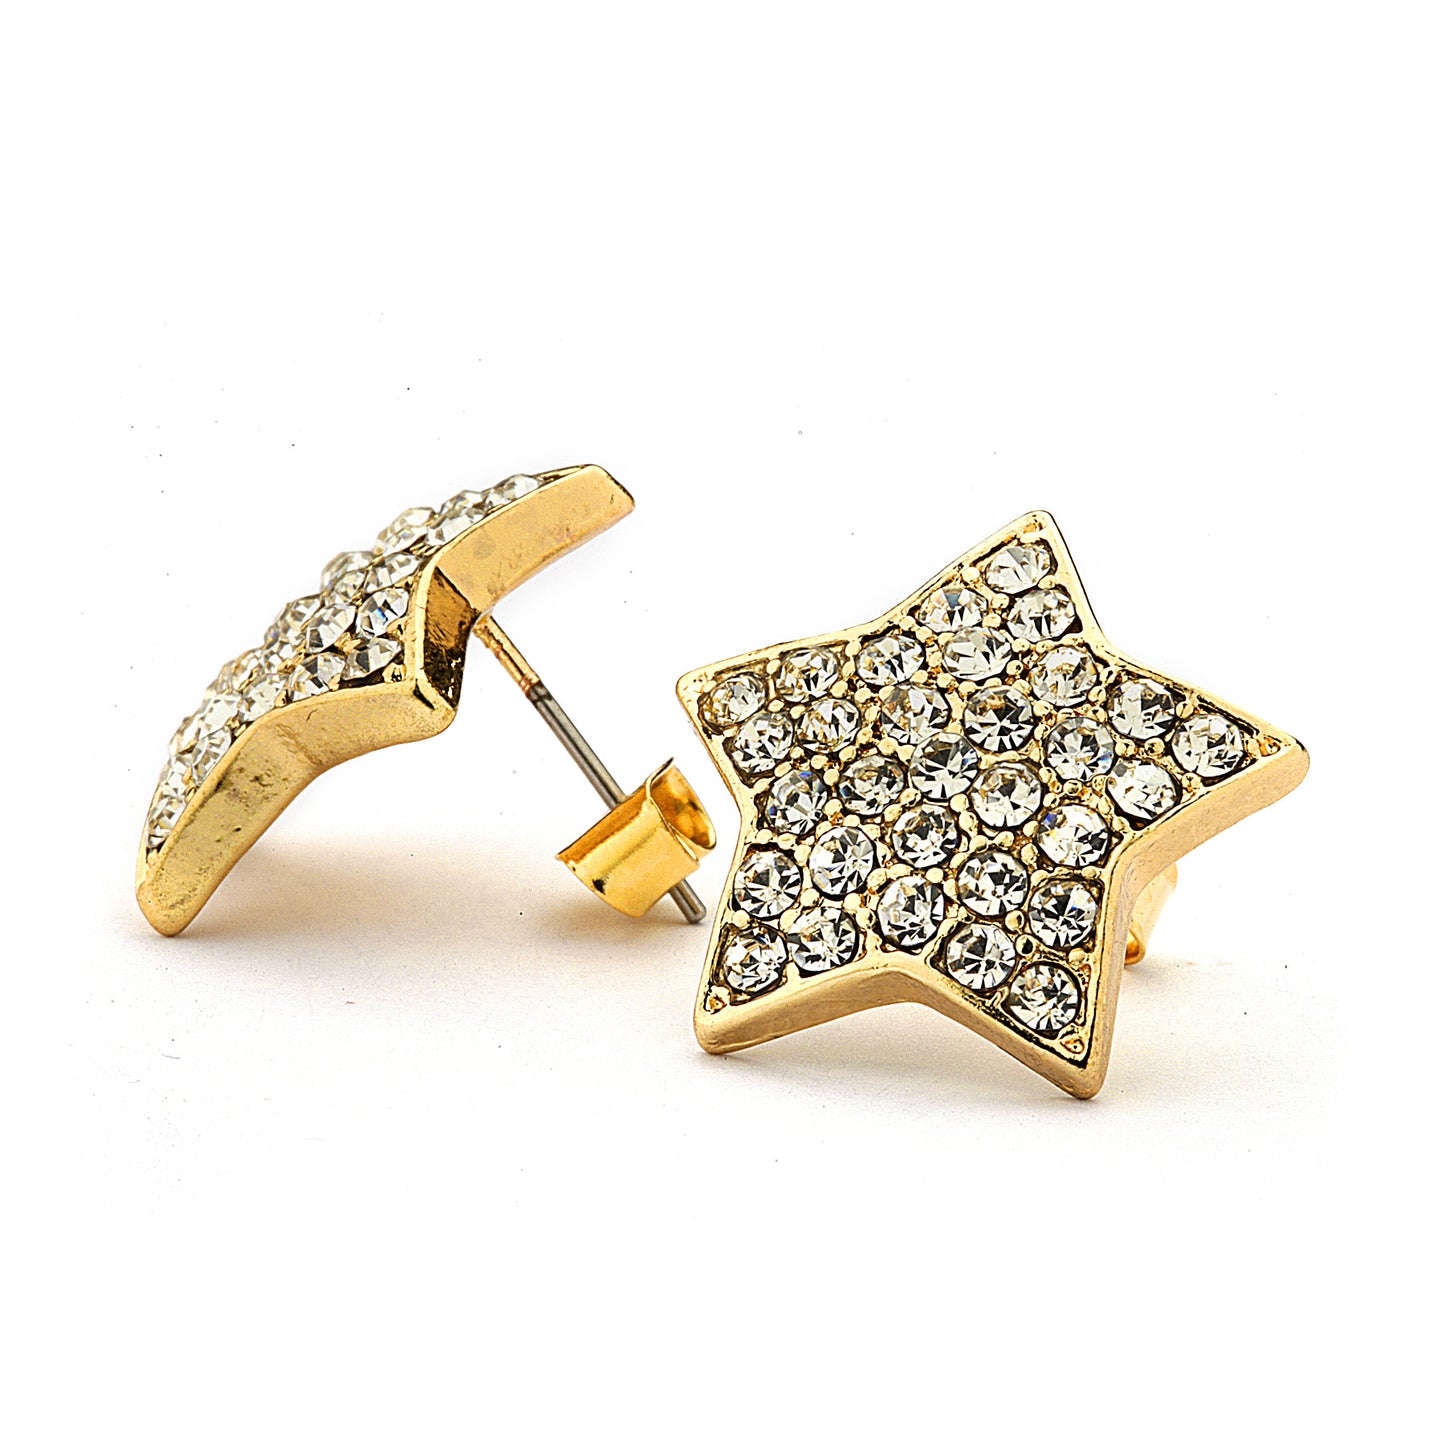 Pave CZ Star Earrings - 14K Gold Filled